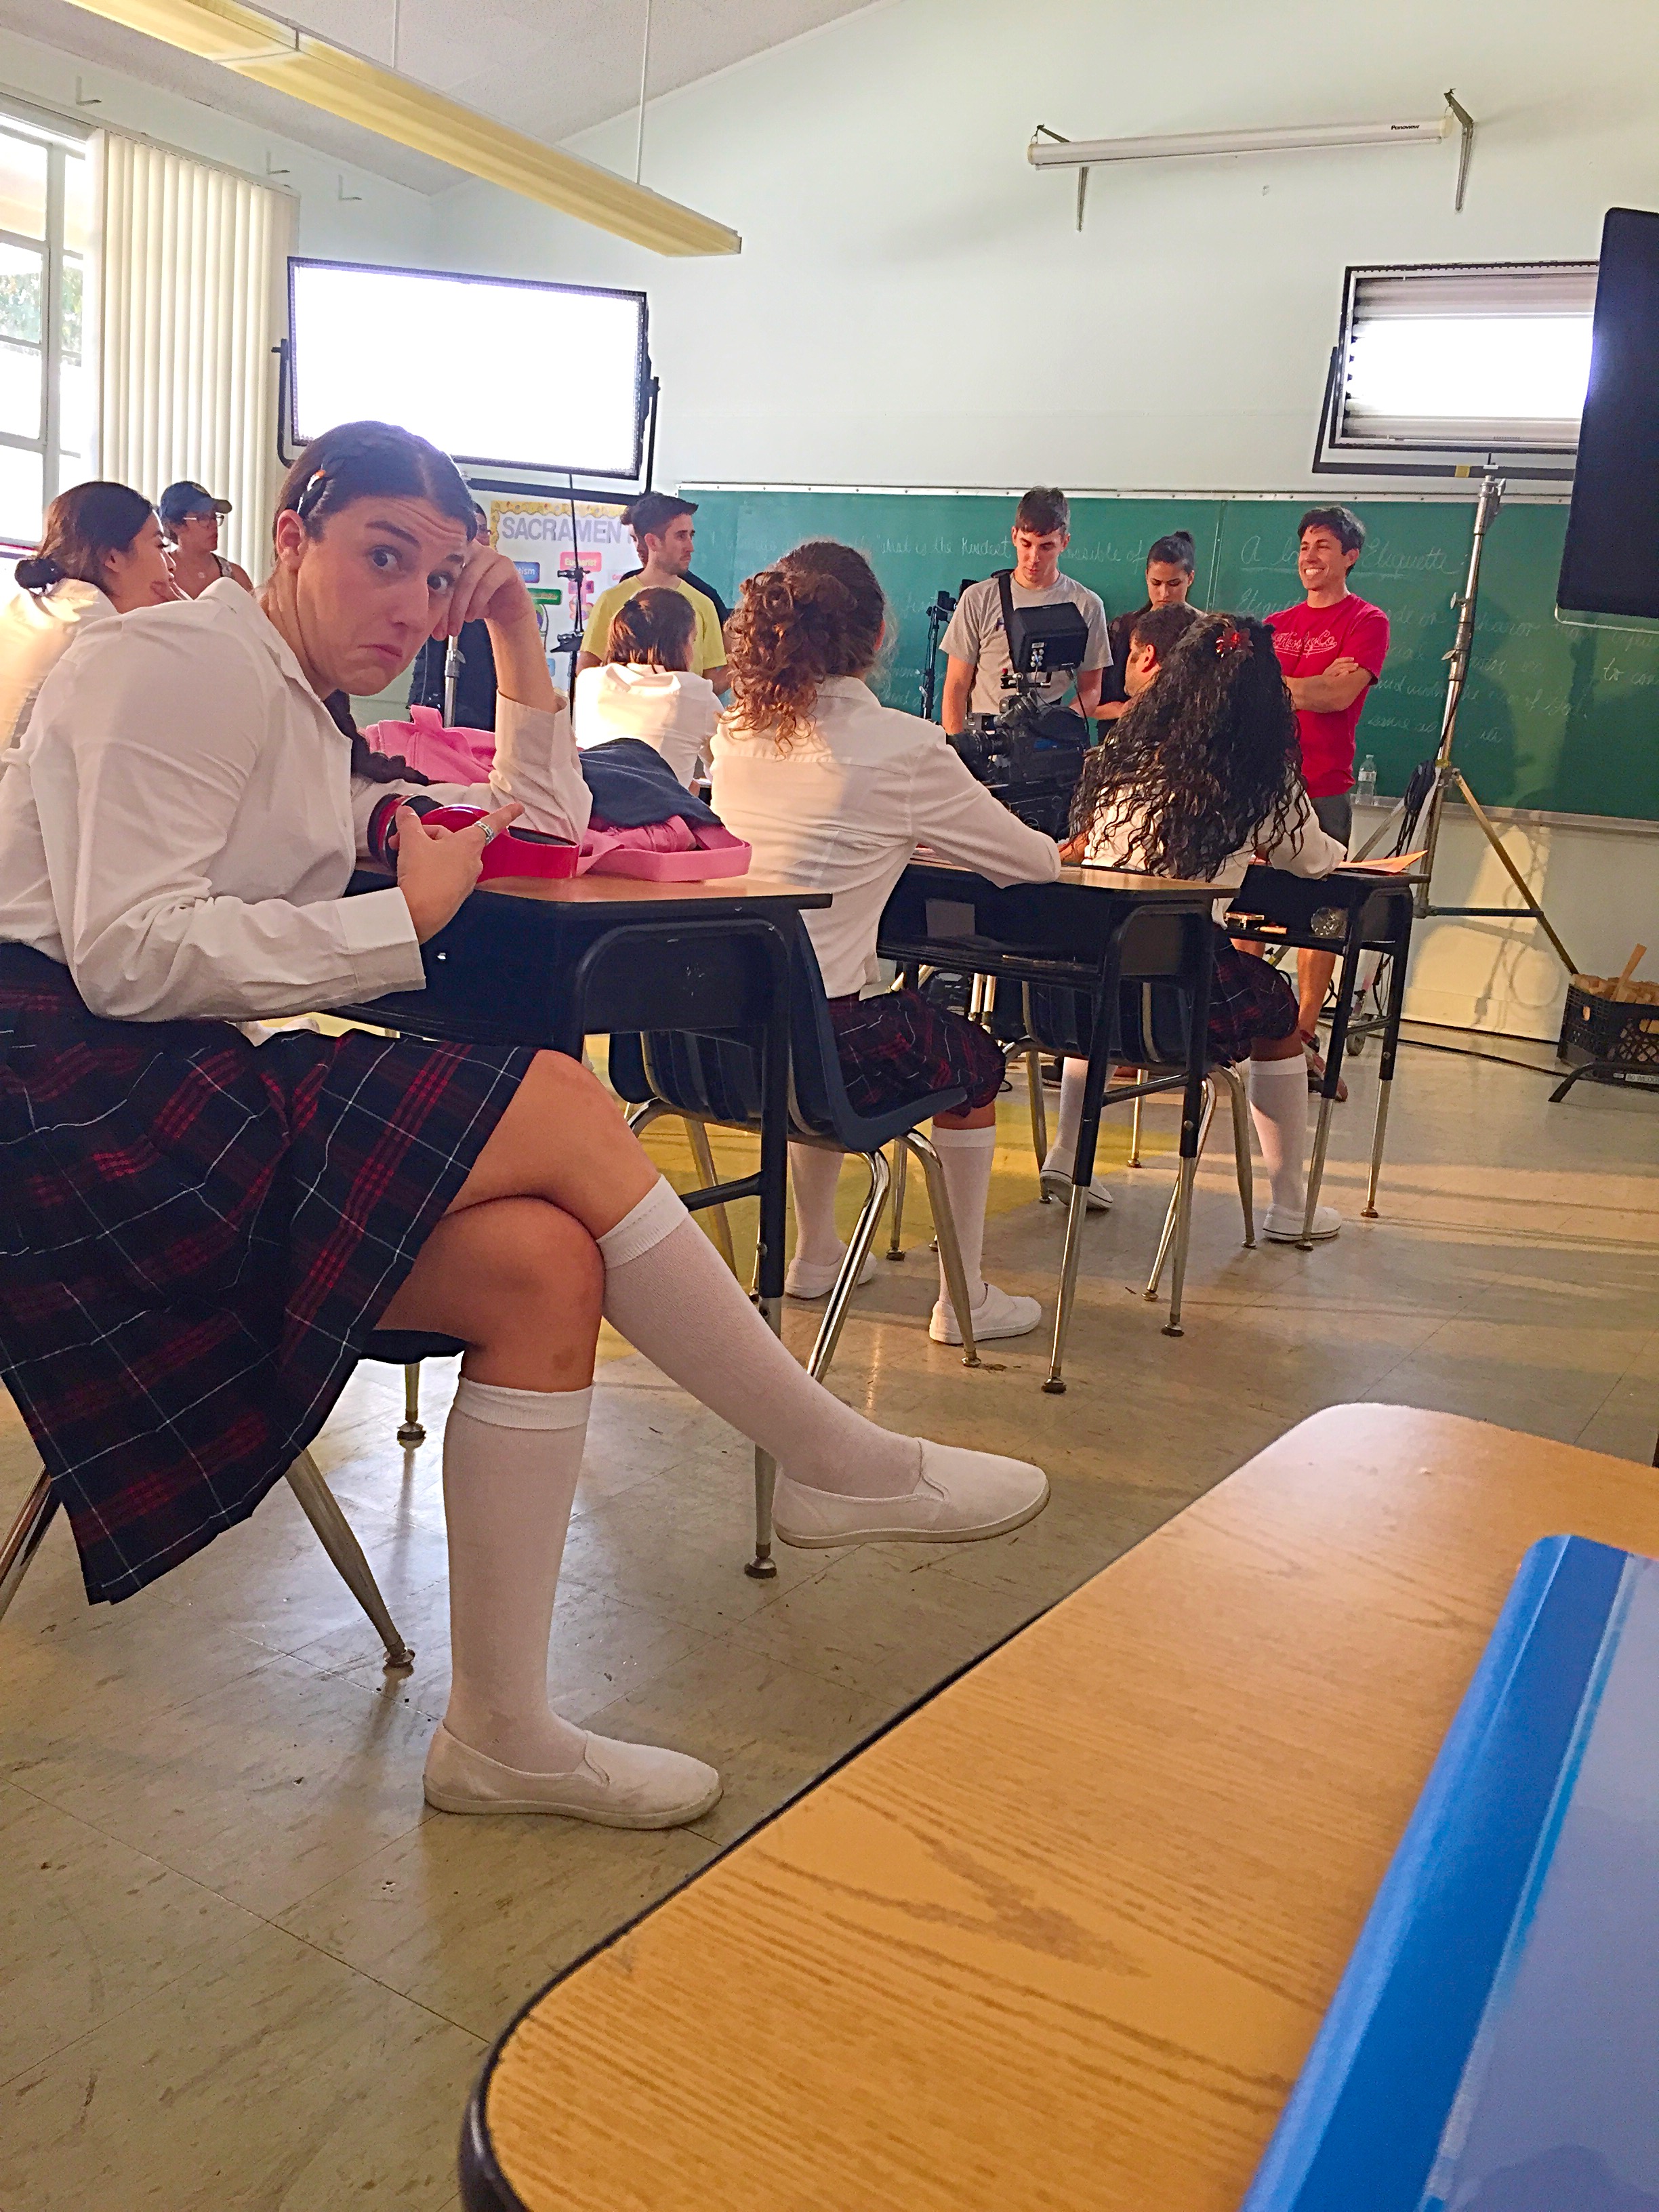 Mary Rachel as a featured dancer/catholic school girl in the feature film 'Breaking Legs'